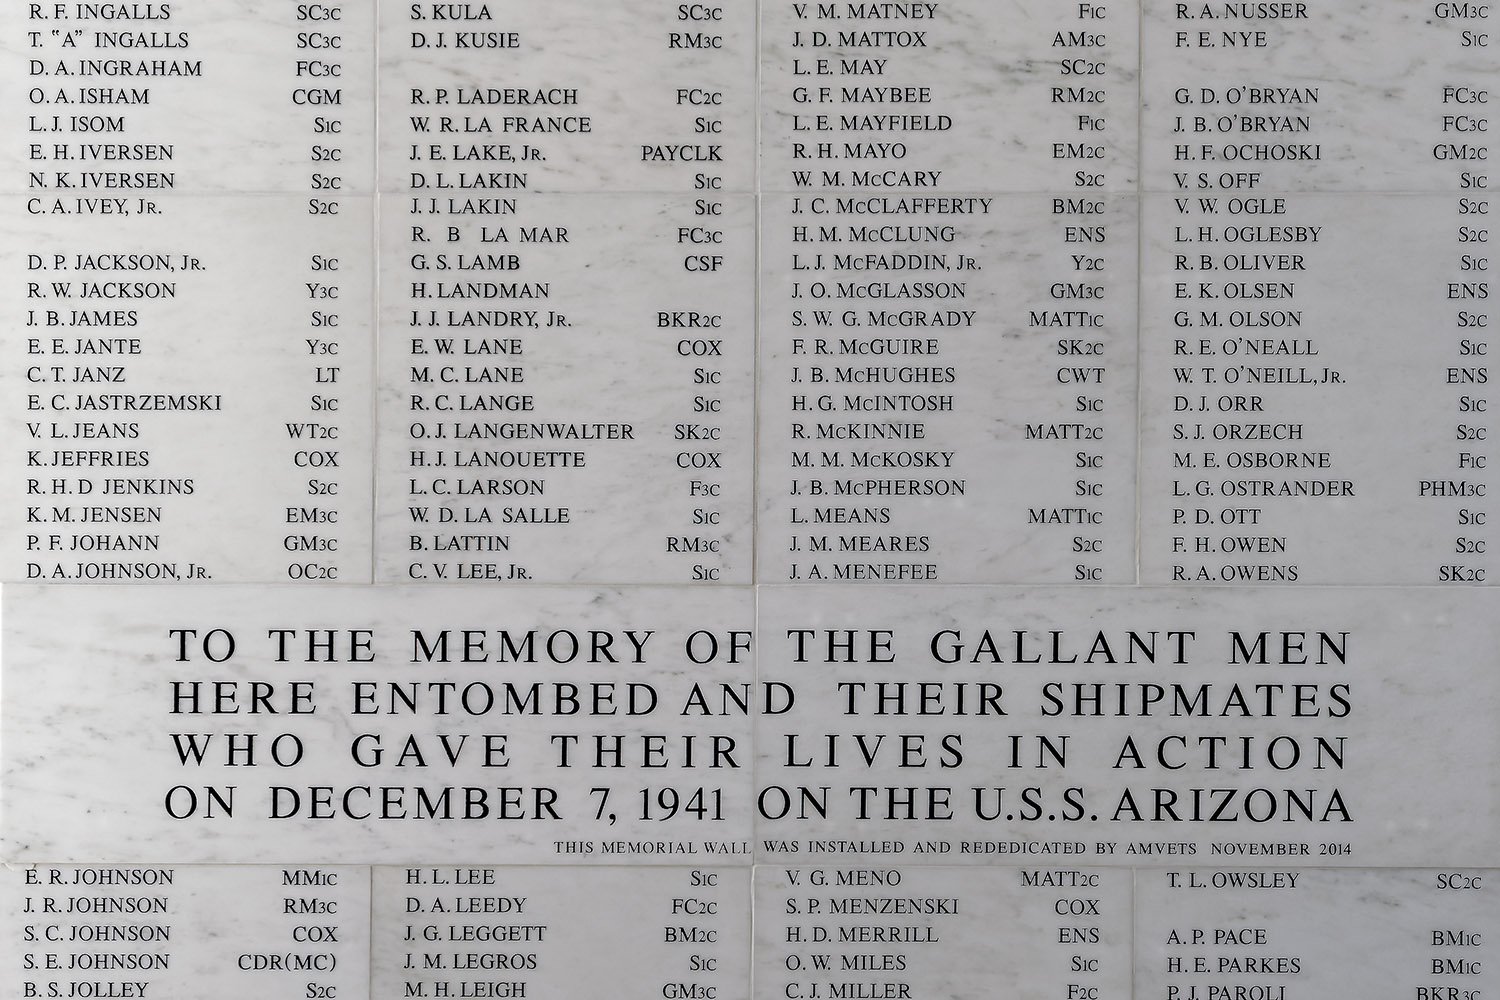 A portion of the marble wall listing the names of those killed on December 7, 1941